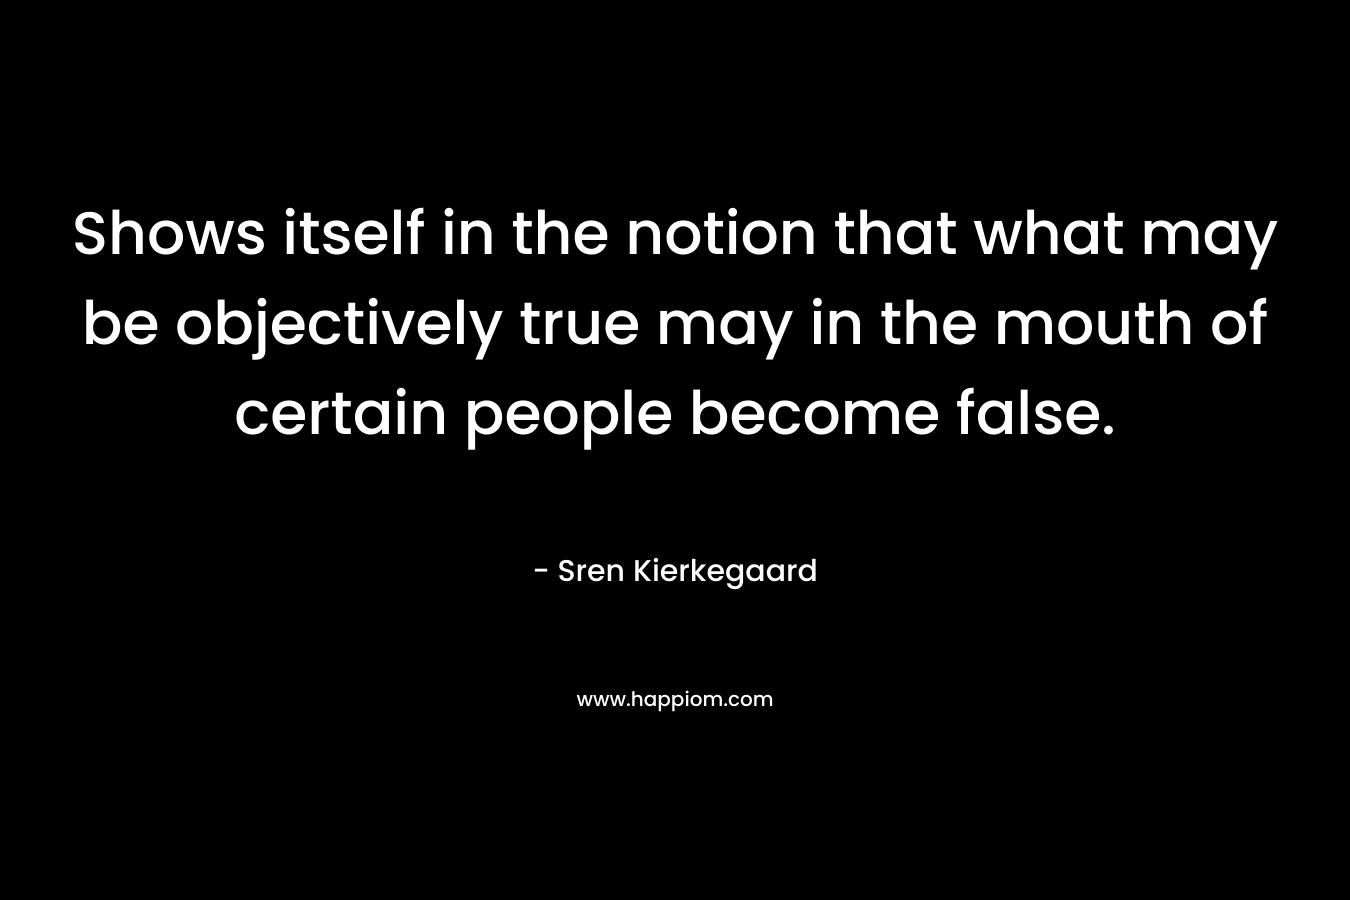 Shows itself in the notion that what may be objectively true may in the mouth of certain people become false. – Sren Kierkegaard